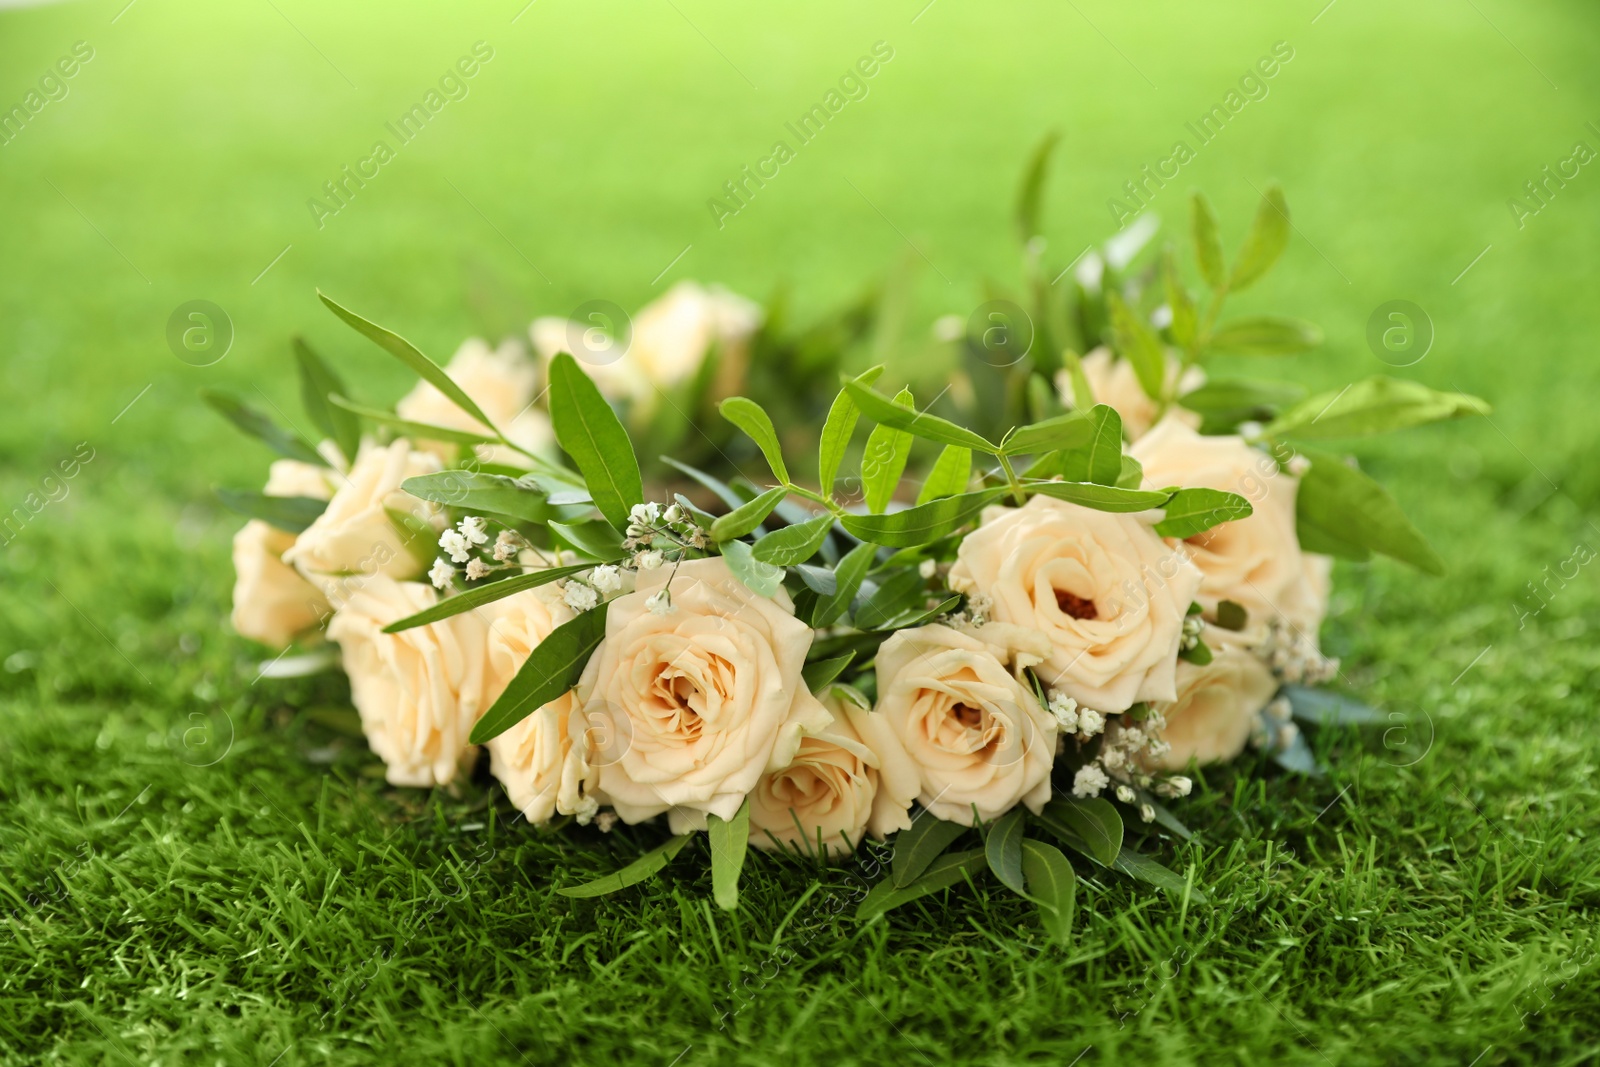 Photo of Wreath made of beautiful flowers on green grass outdoors